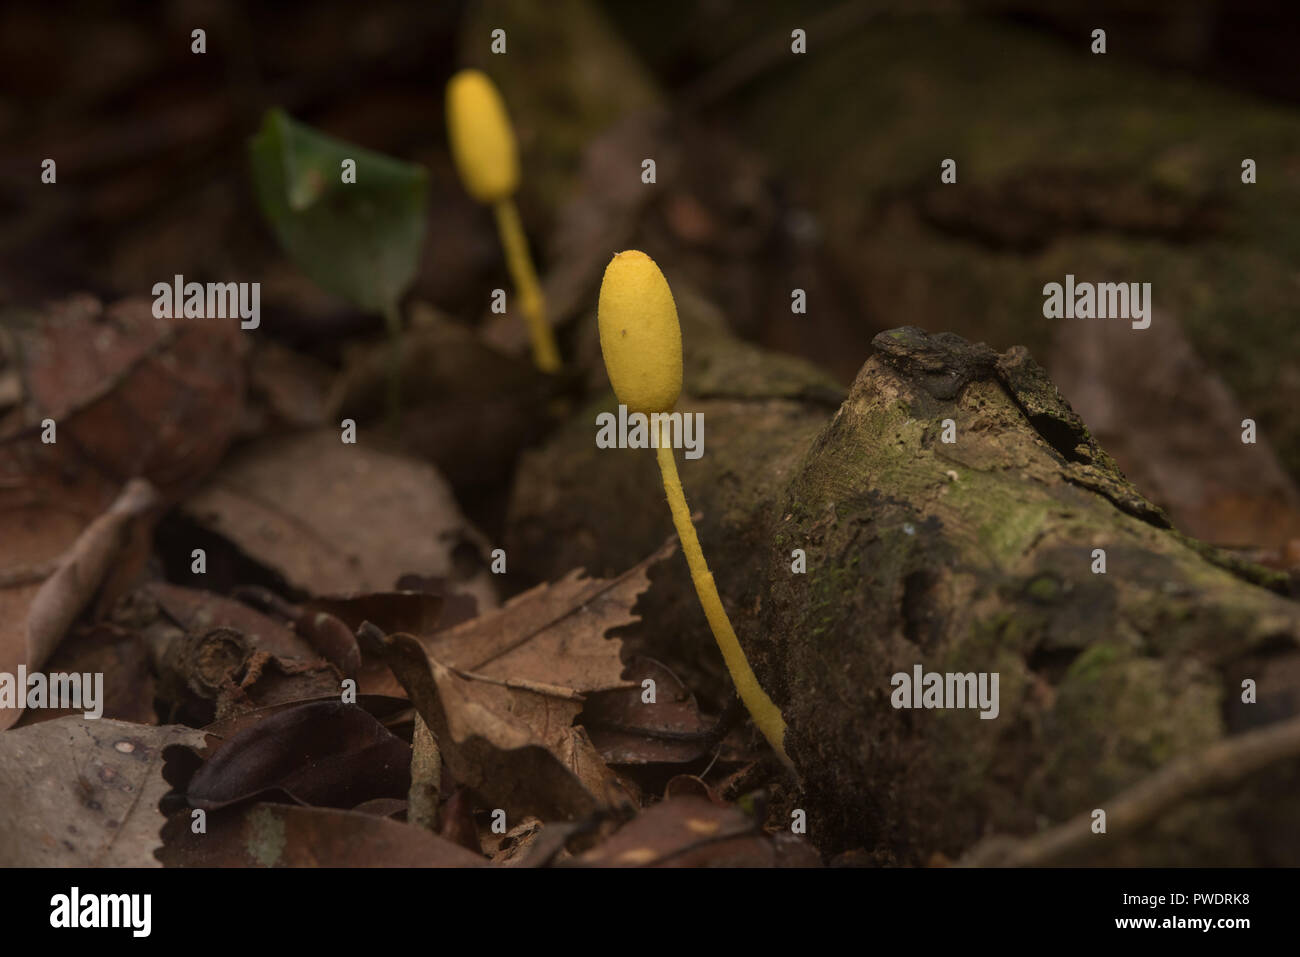 Small Bright Yellow Mushrooms Growing On The Forest Floor In The